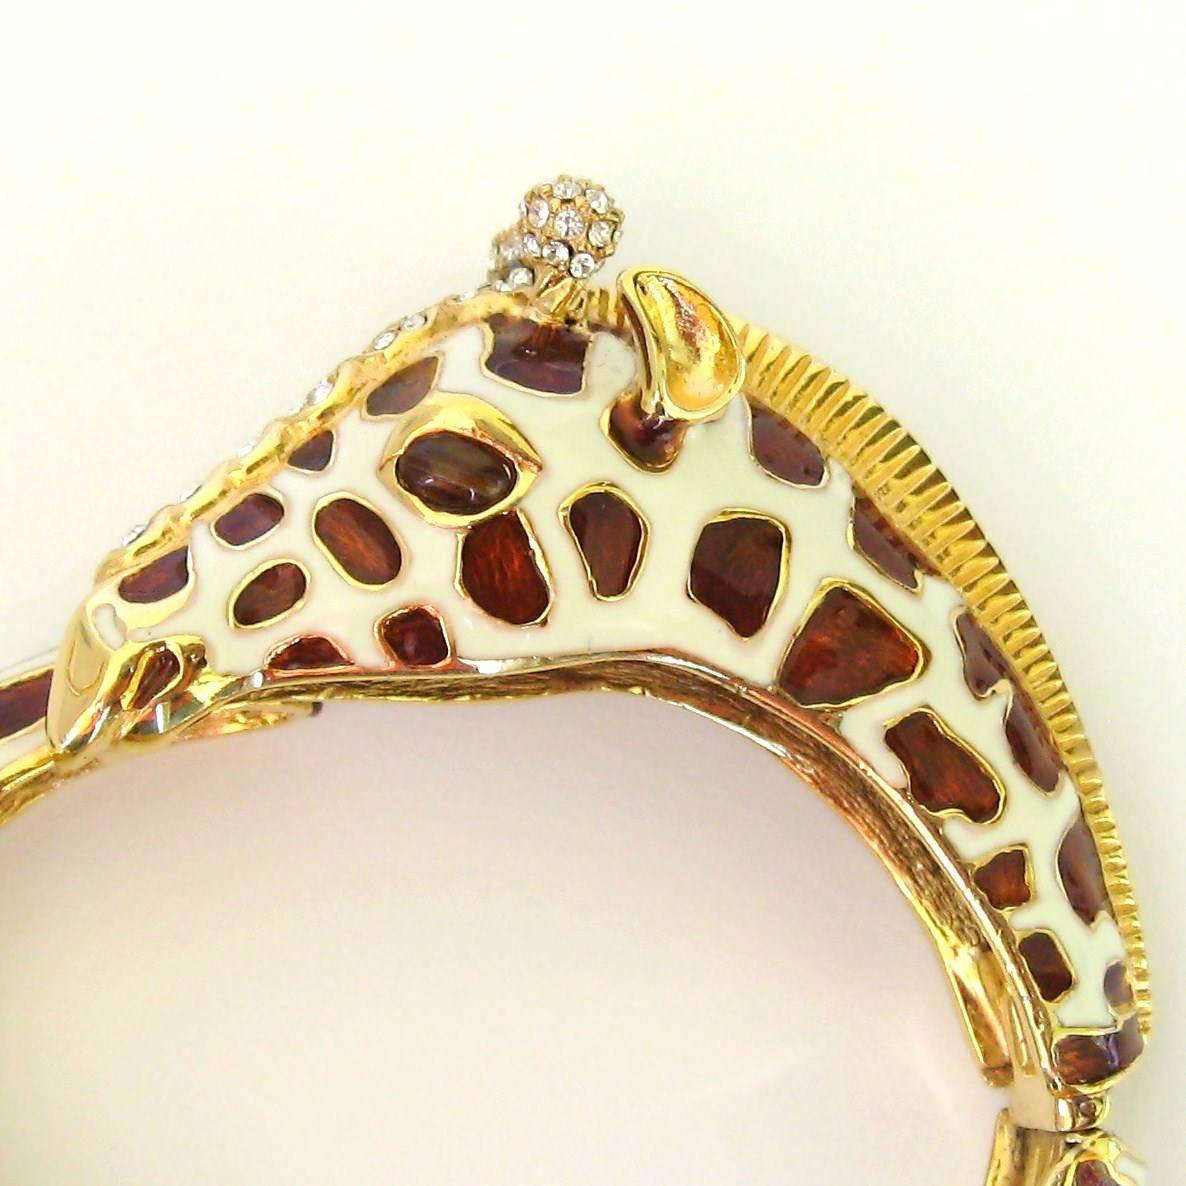 Ciner Giraffe Rhinestone Enamel Bracelet. Has a gold toned base with cream enamel, Swarovski Crystal  adorn this bracelet. Inside Measures 7 inches. This piece is New With Tags from Neiman Marcus purchased back in the 1980s. This is out of our